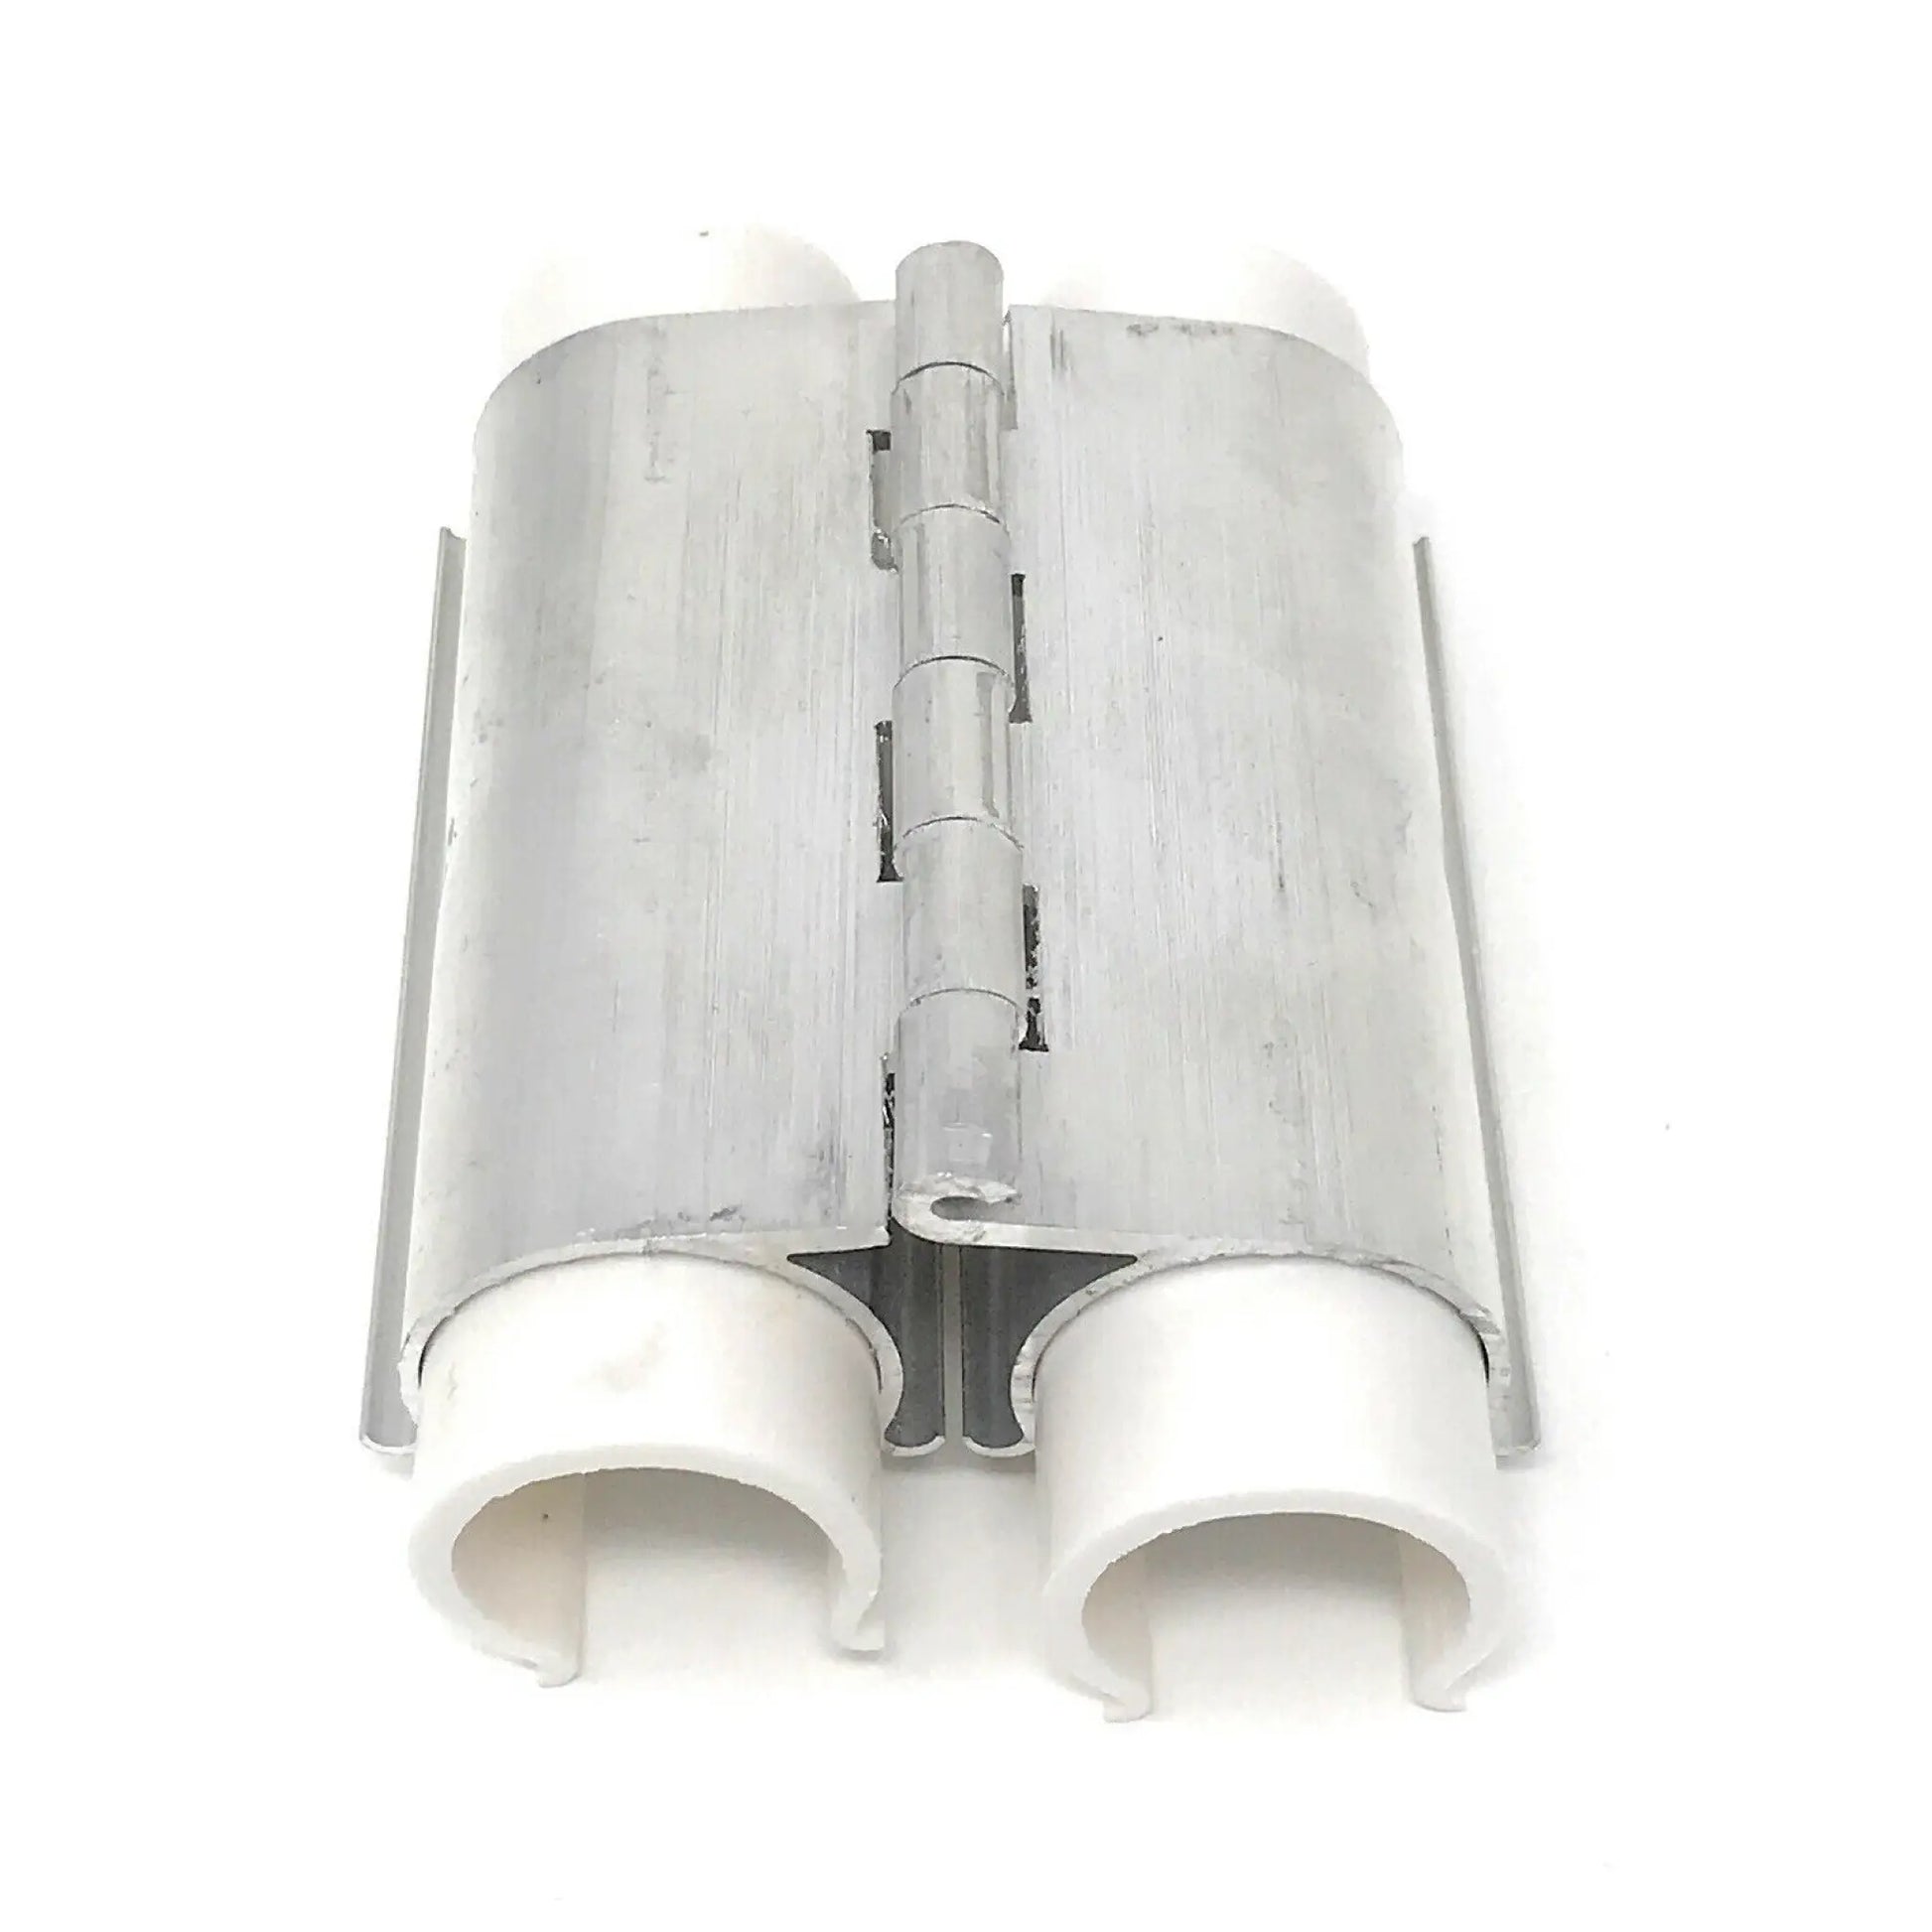 Aluminum Snap on Hinges for PVC pipes